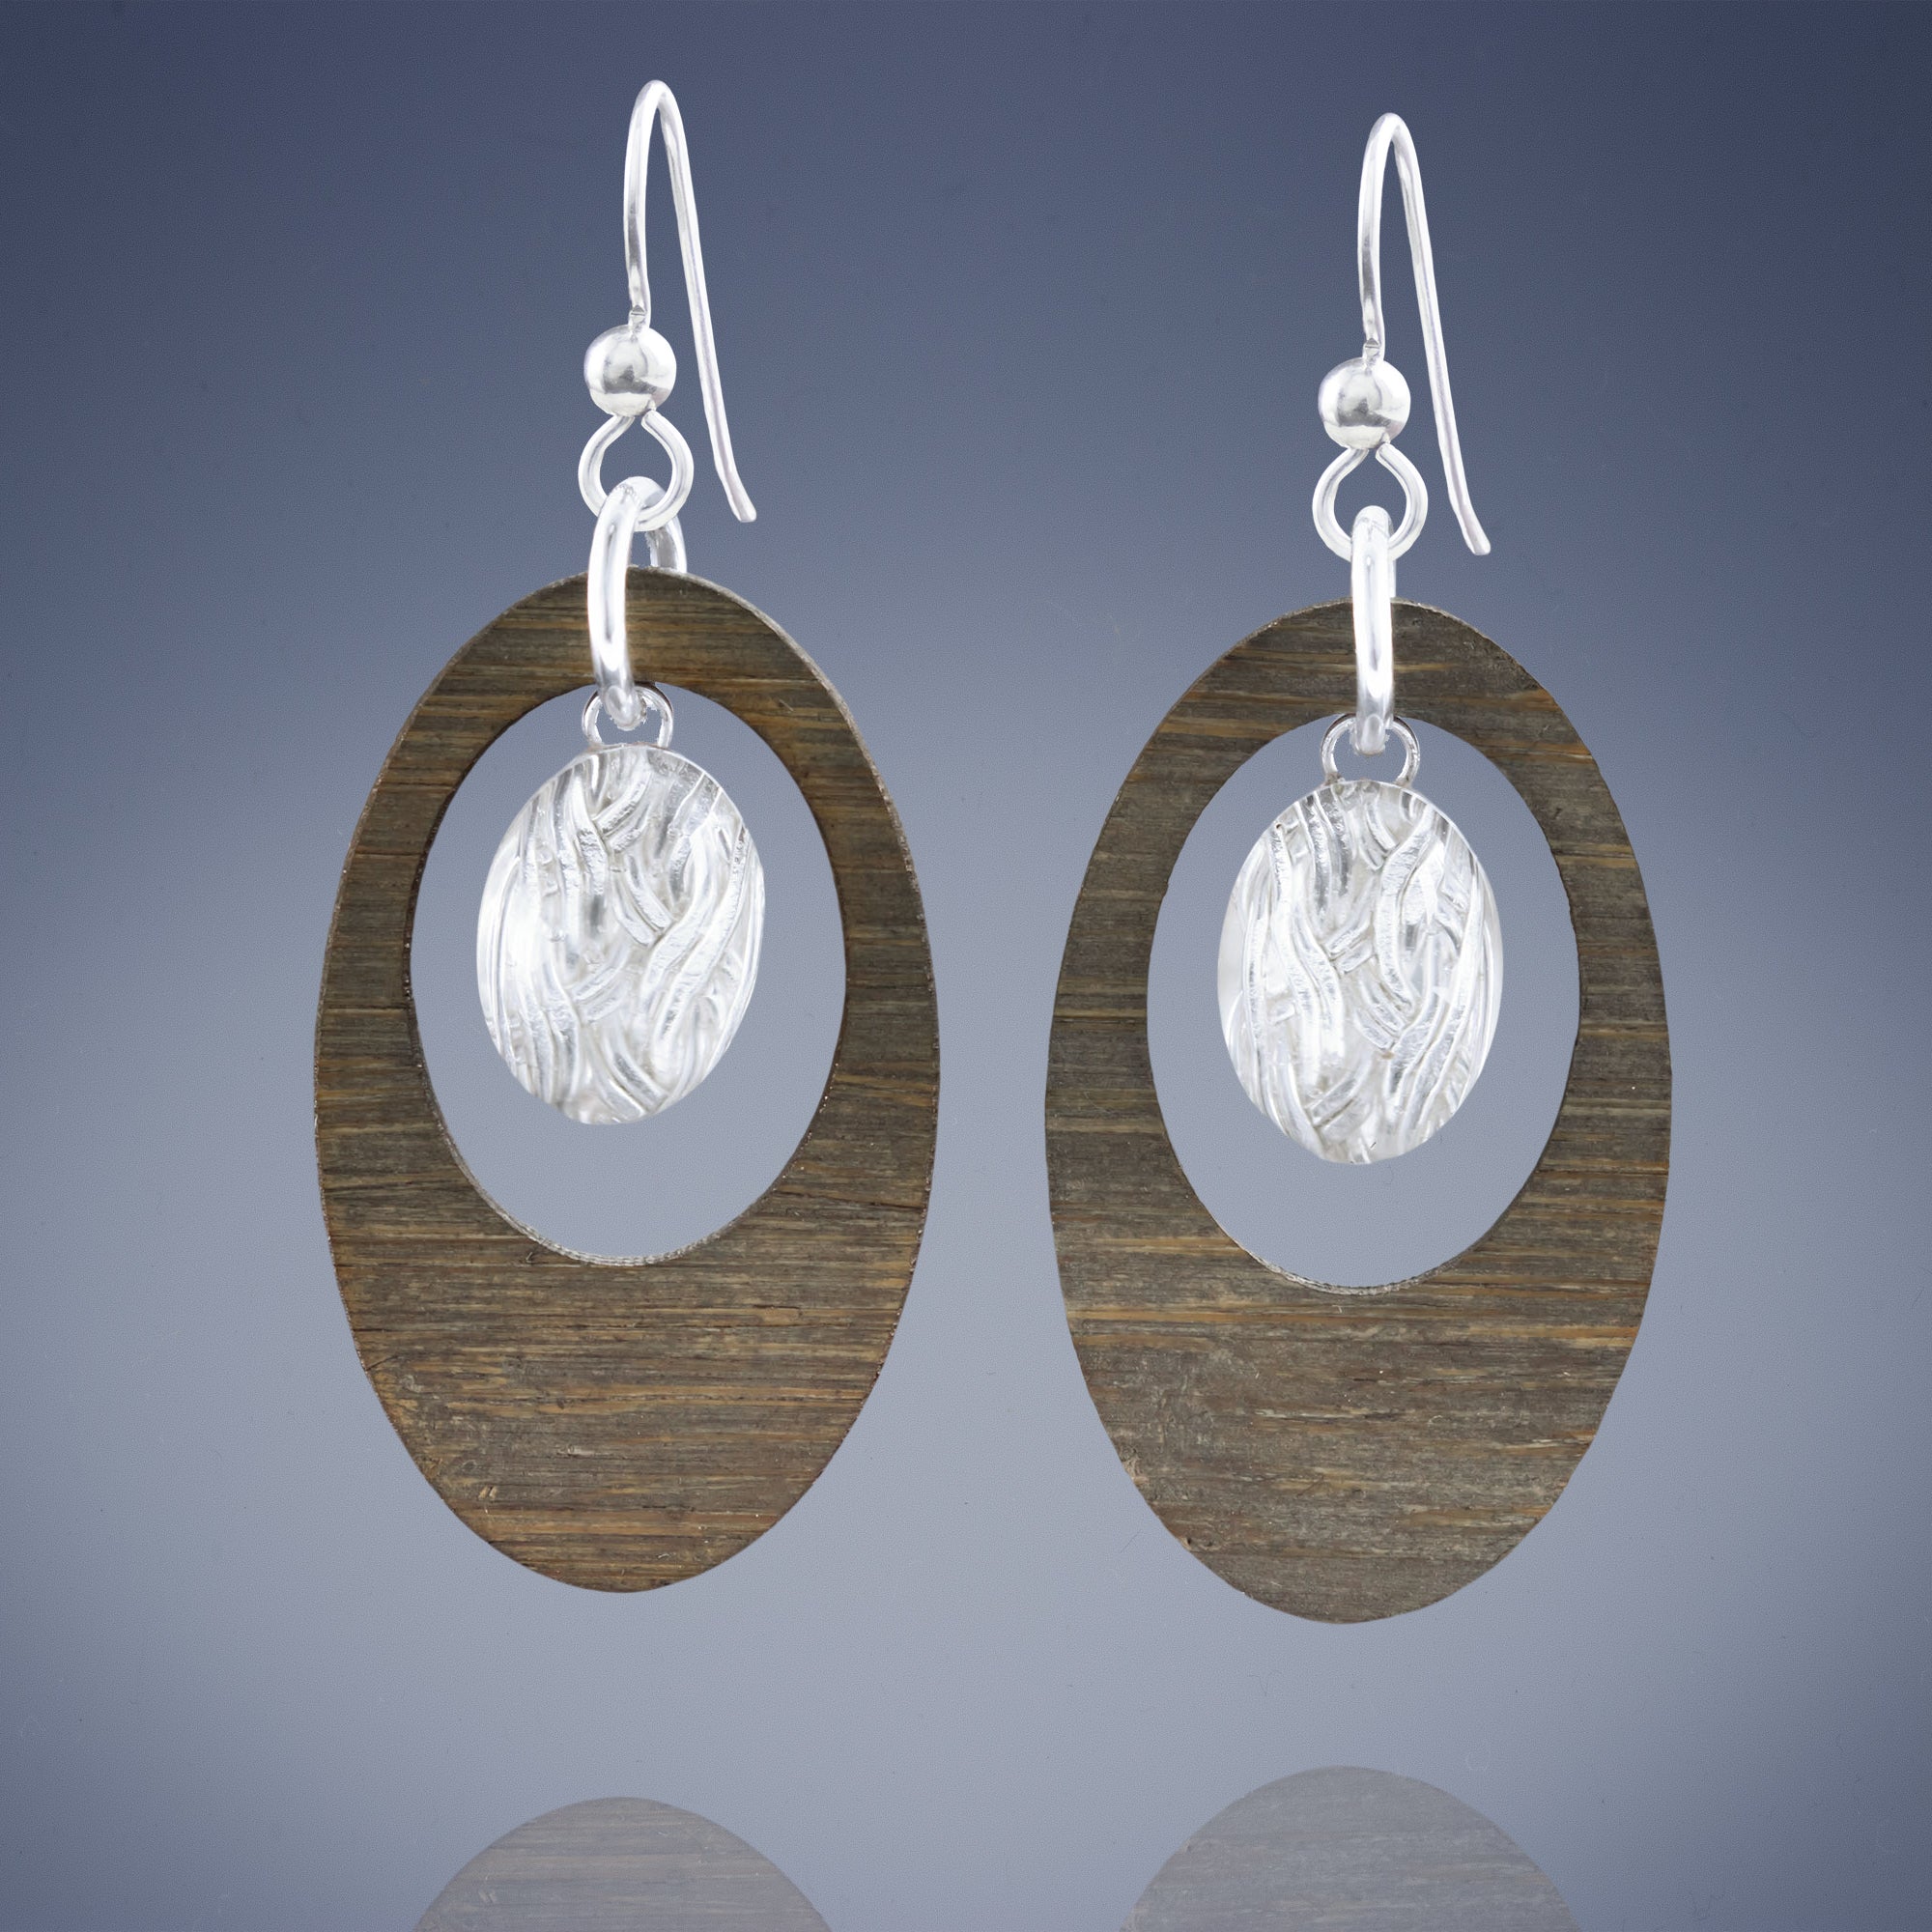 Oval Bamboo Hoop Drop Earrings with Sterling Silver and Glass